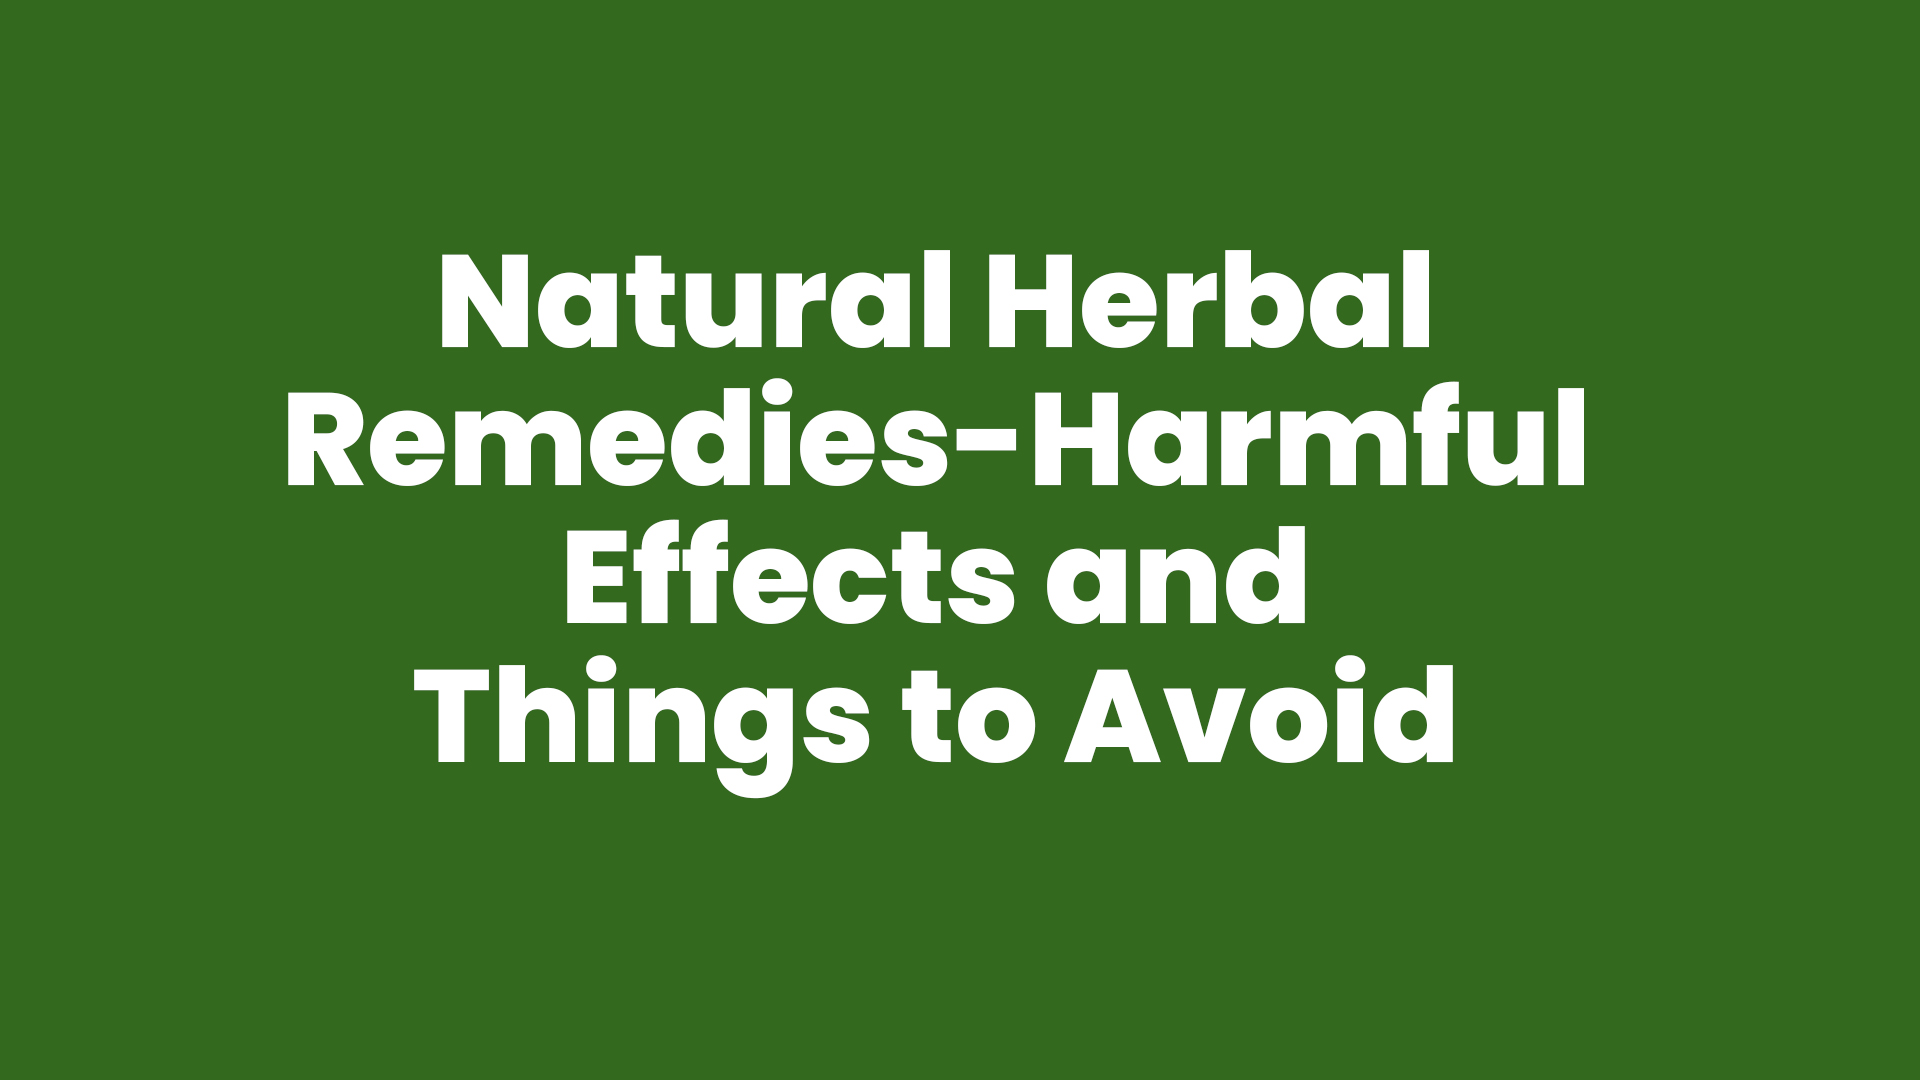 Natural Herbal Remedies-Harmful Effects and Things to Avoid